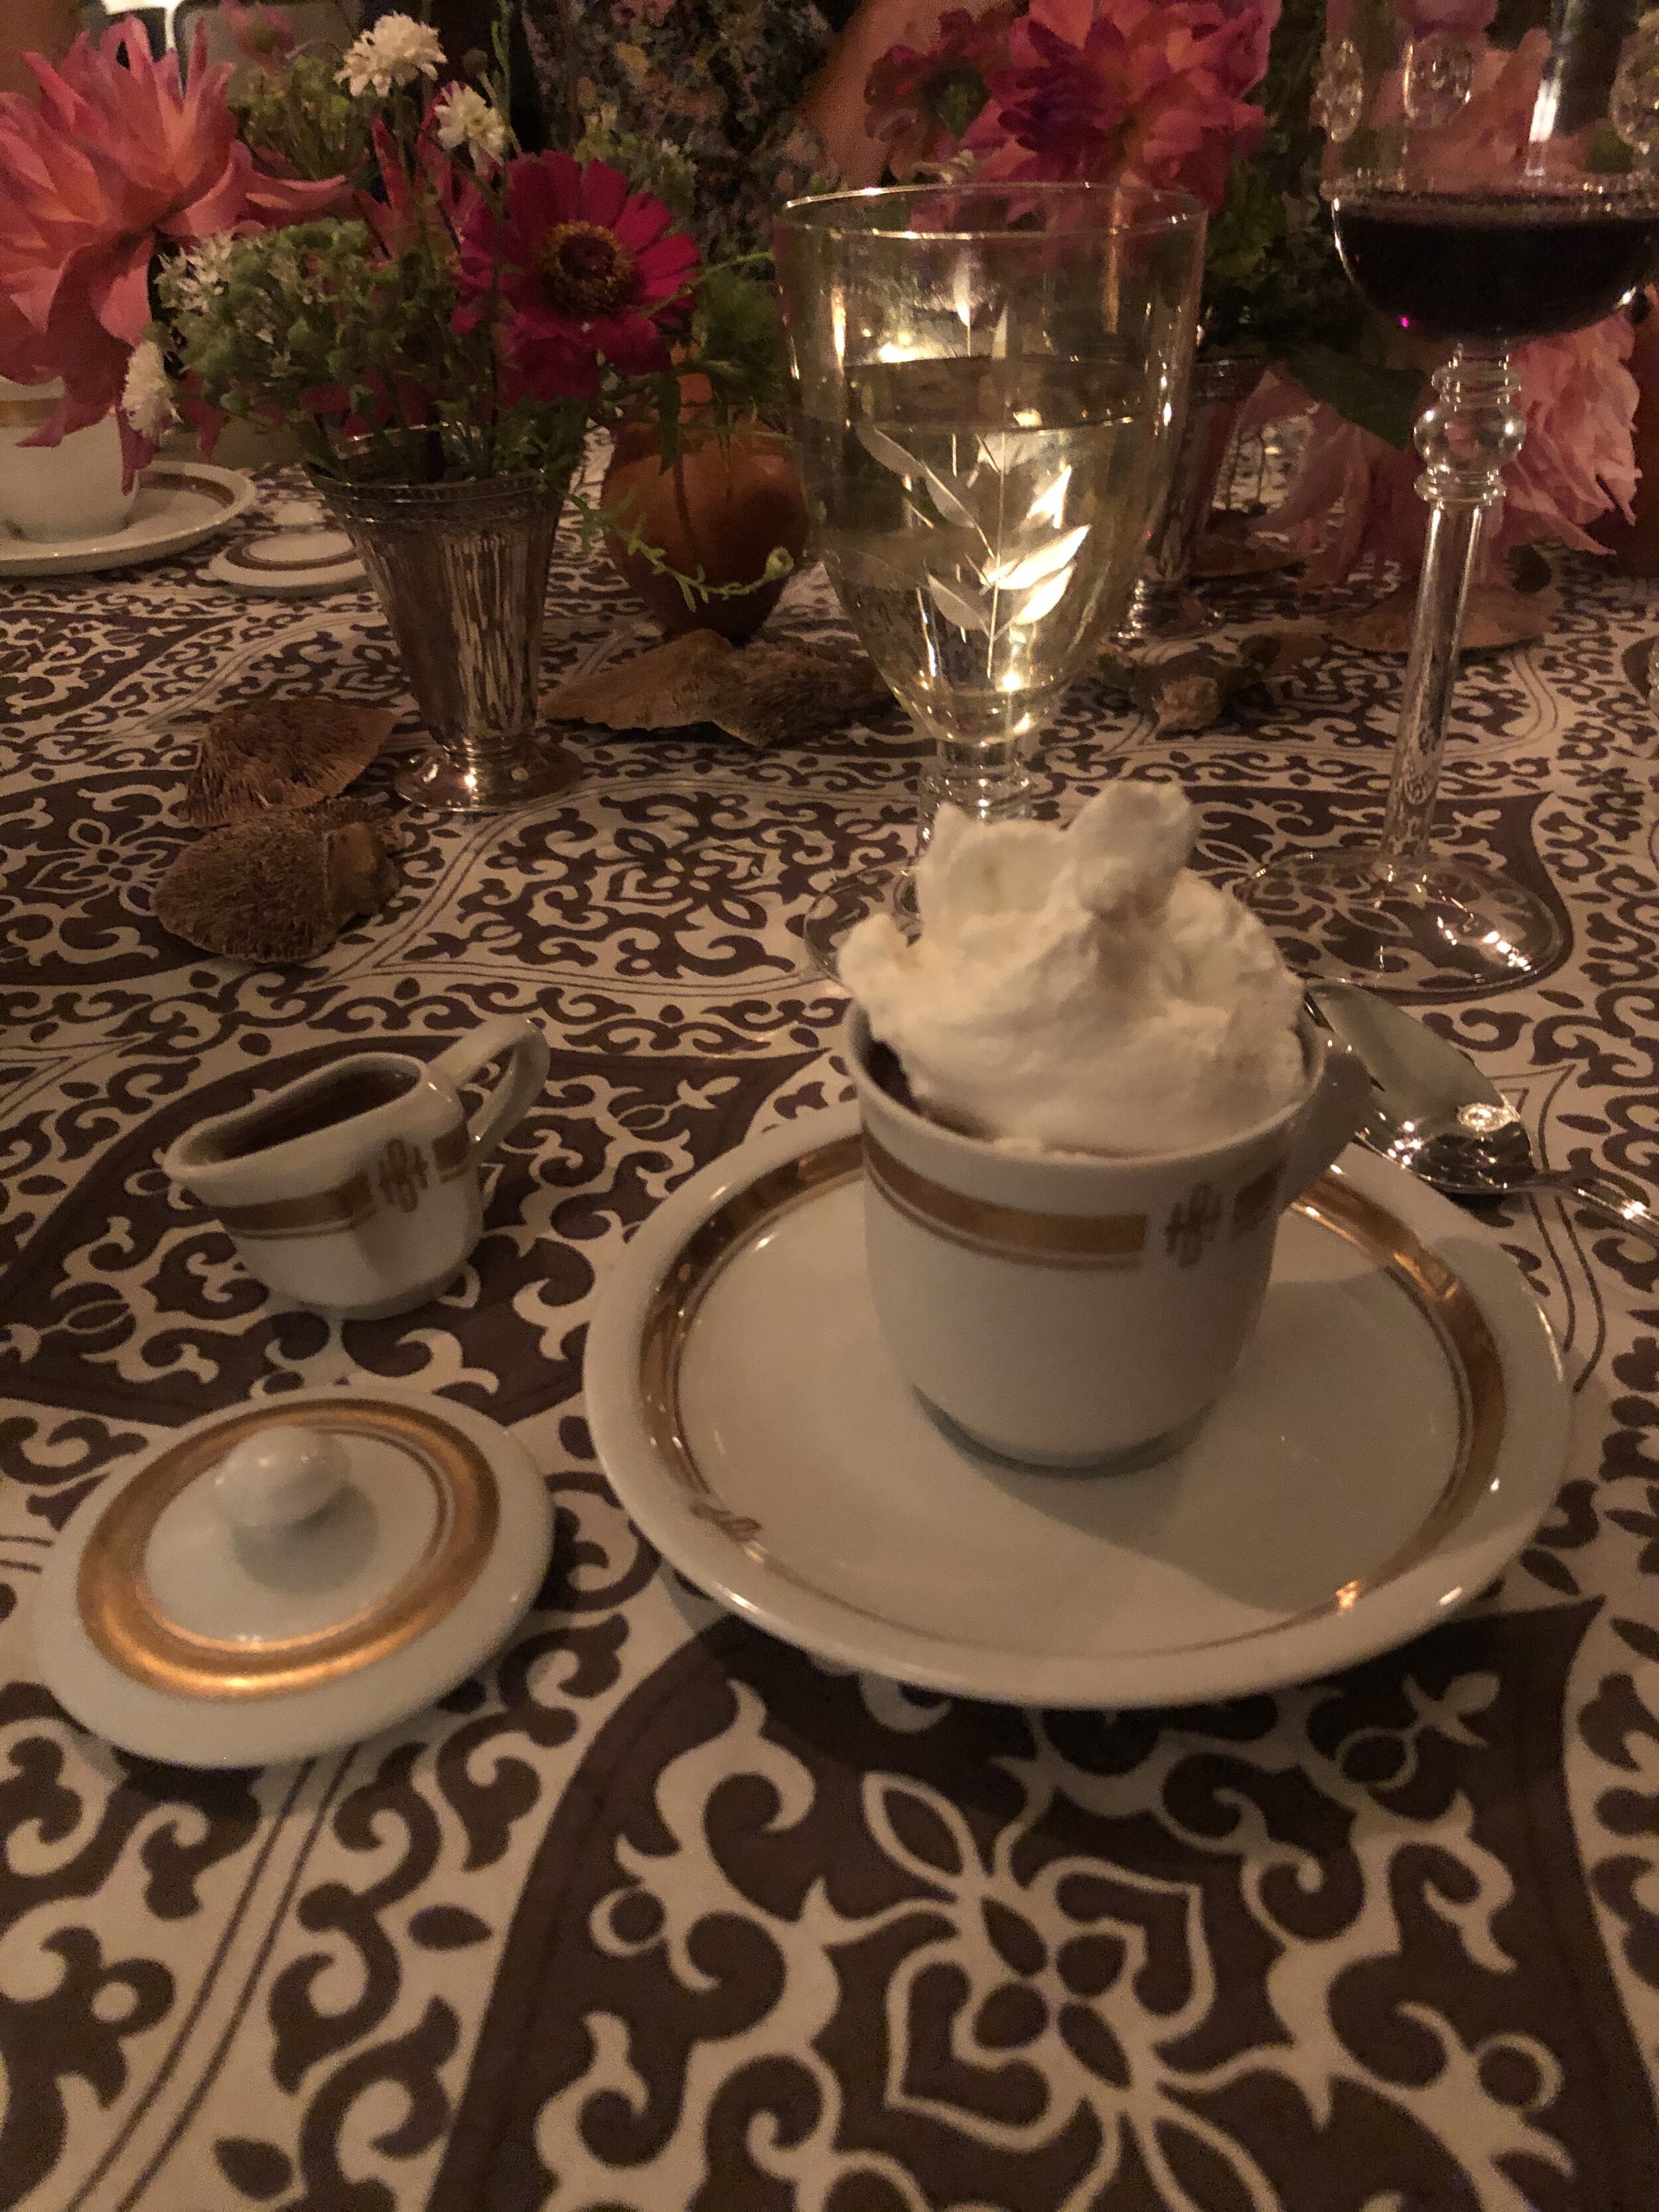  Served with homemade whipped cream and a caramel drizzle. I have a few recipes that I like for this yummy dessert — this time I tested Ina Garten’s    Pots de Crème   . Slightly surprised she didn’t include coffee (as she uses it often in Chocolate 